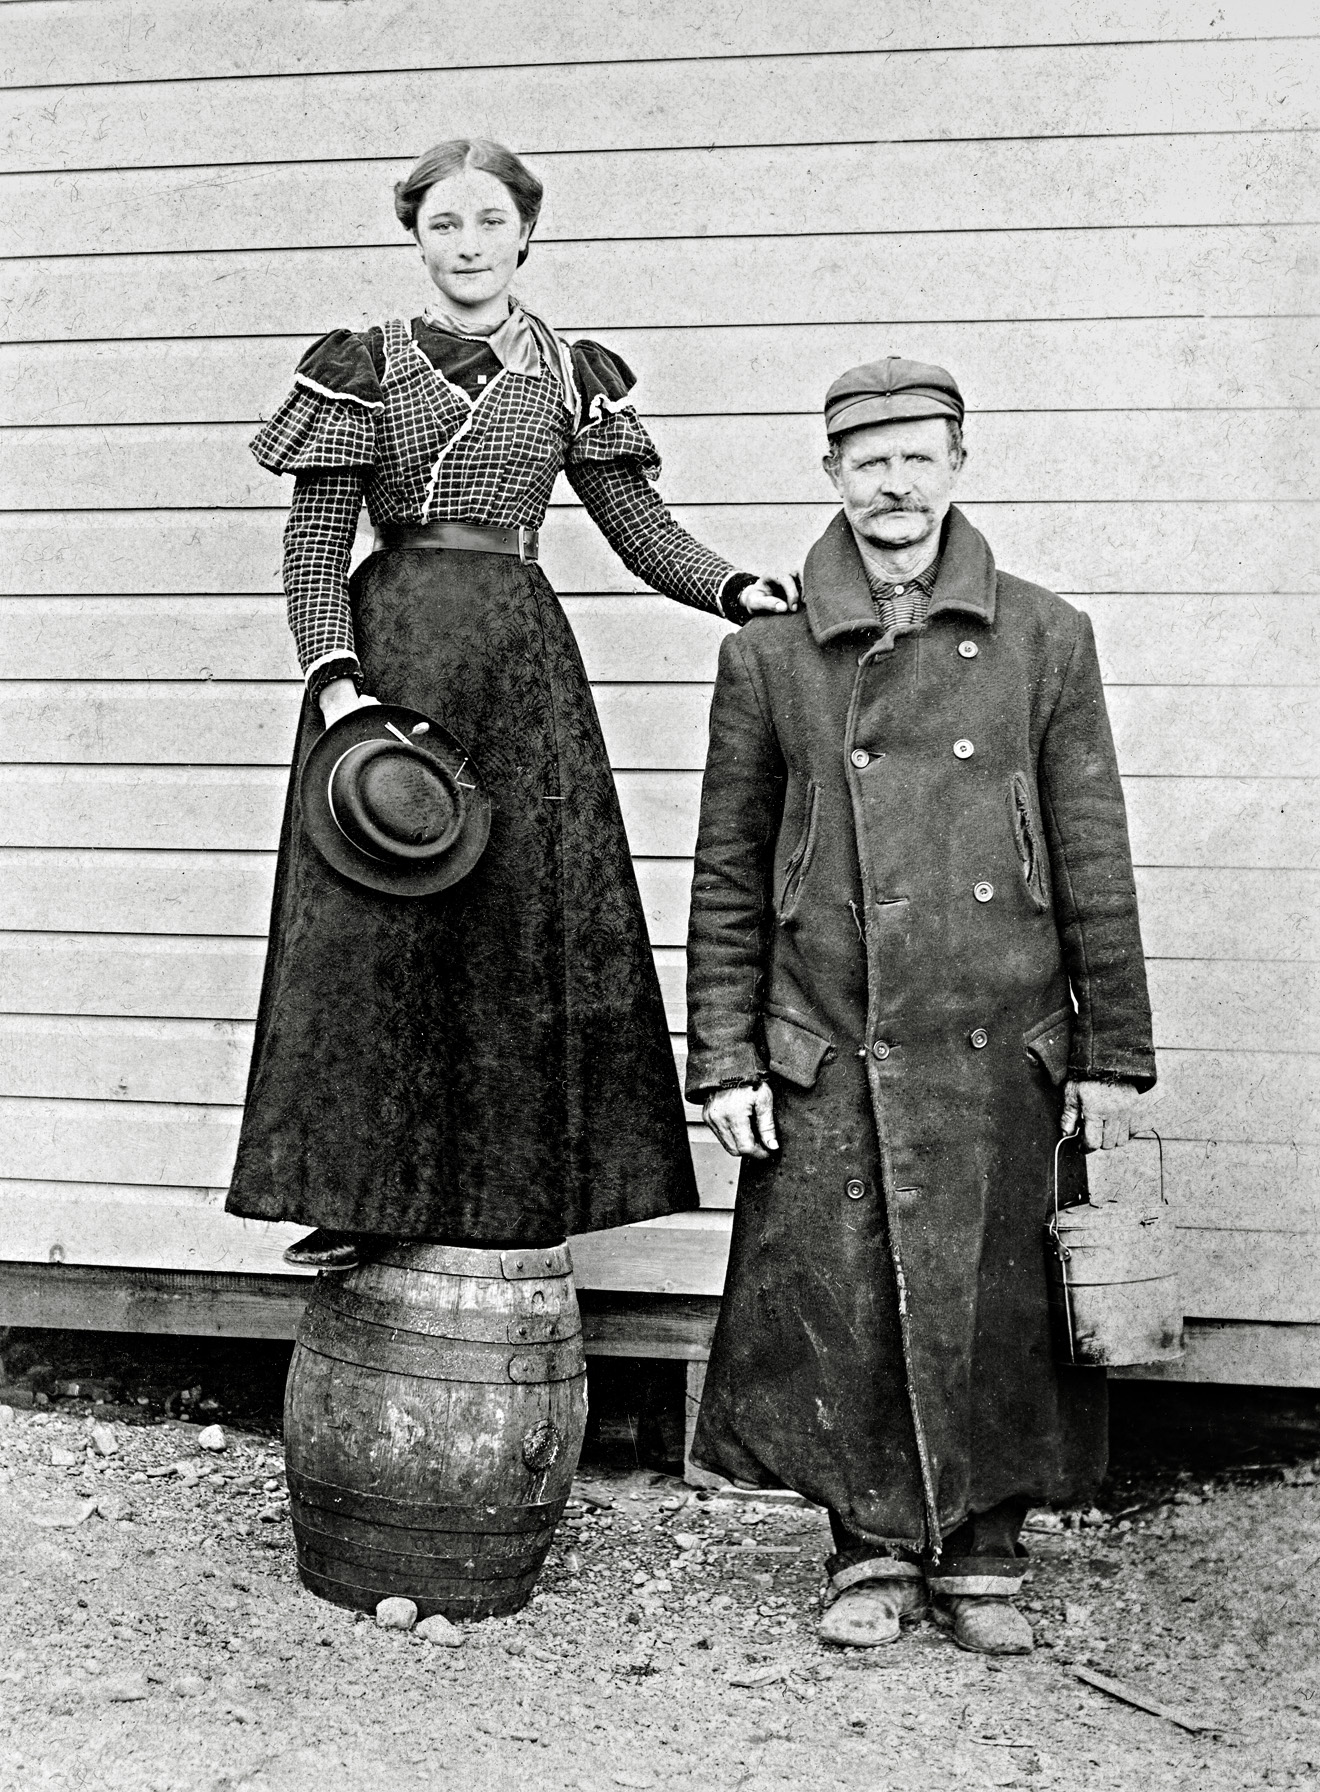 From the James Wallace glass plate collection (LaSalle, Illinois). James Wallace was born March 26, 1857 in Plainfield, Illinois son of John and Agnes (Taylor) Wallace who emigrated from Ayr, Scotland in about 1856, His sisters, Agnes and Annie, were born in Scotland and his younger sisters, Isabel and Jessica, in Illinois. He was a farmer, photographer, inventor and watch repairer and a member of the Waltham Presbyterian Church and director of the LaSalle National Bank in LaSalle, Illinois, He lived in Waltham Township in LaSalle County not too far from Starved Rock. He never married so has no children. He died on May 7, 1936 and is buried at Pleasant Hill Cemetery, Waltham Township, LaSalle County, Illinois. (Courtesy of the family of James Wallace & Kate Morris Dickerson) View full size.